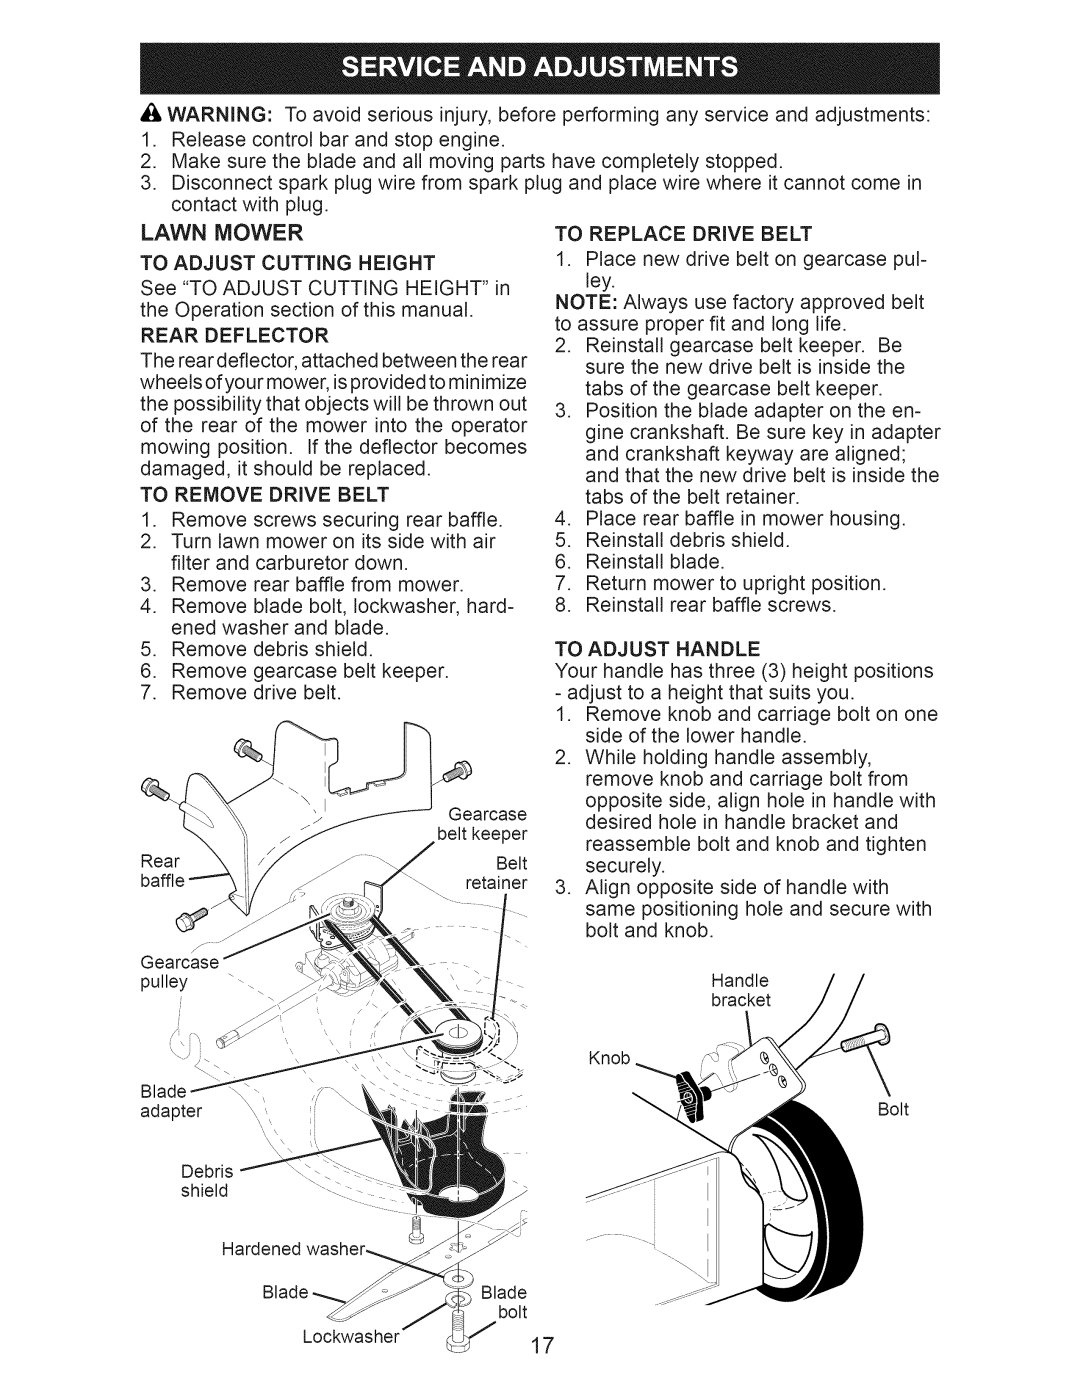 Craftsman 917.374362 manual contact with plug, Lawn Mower 